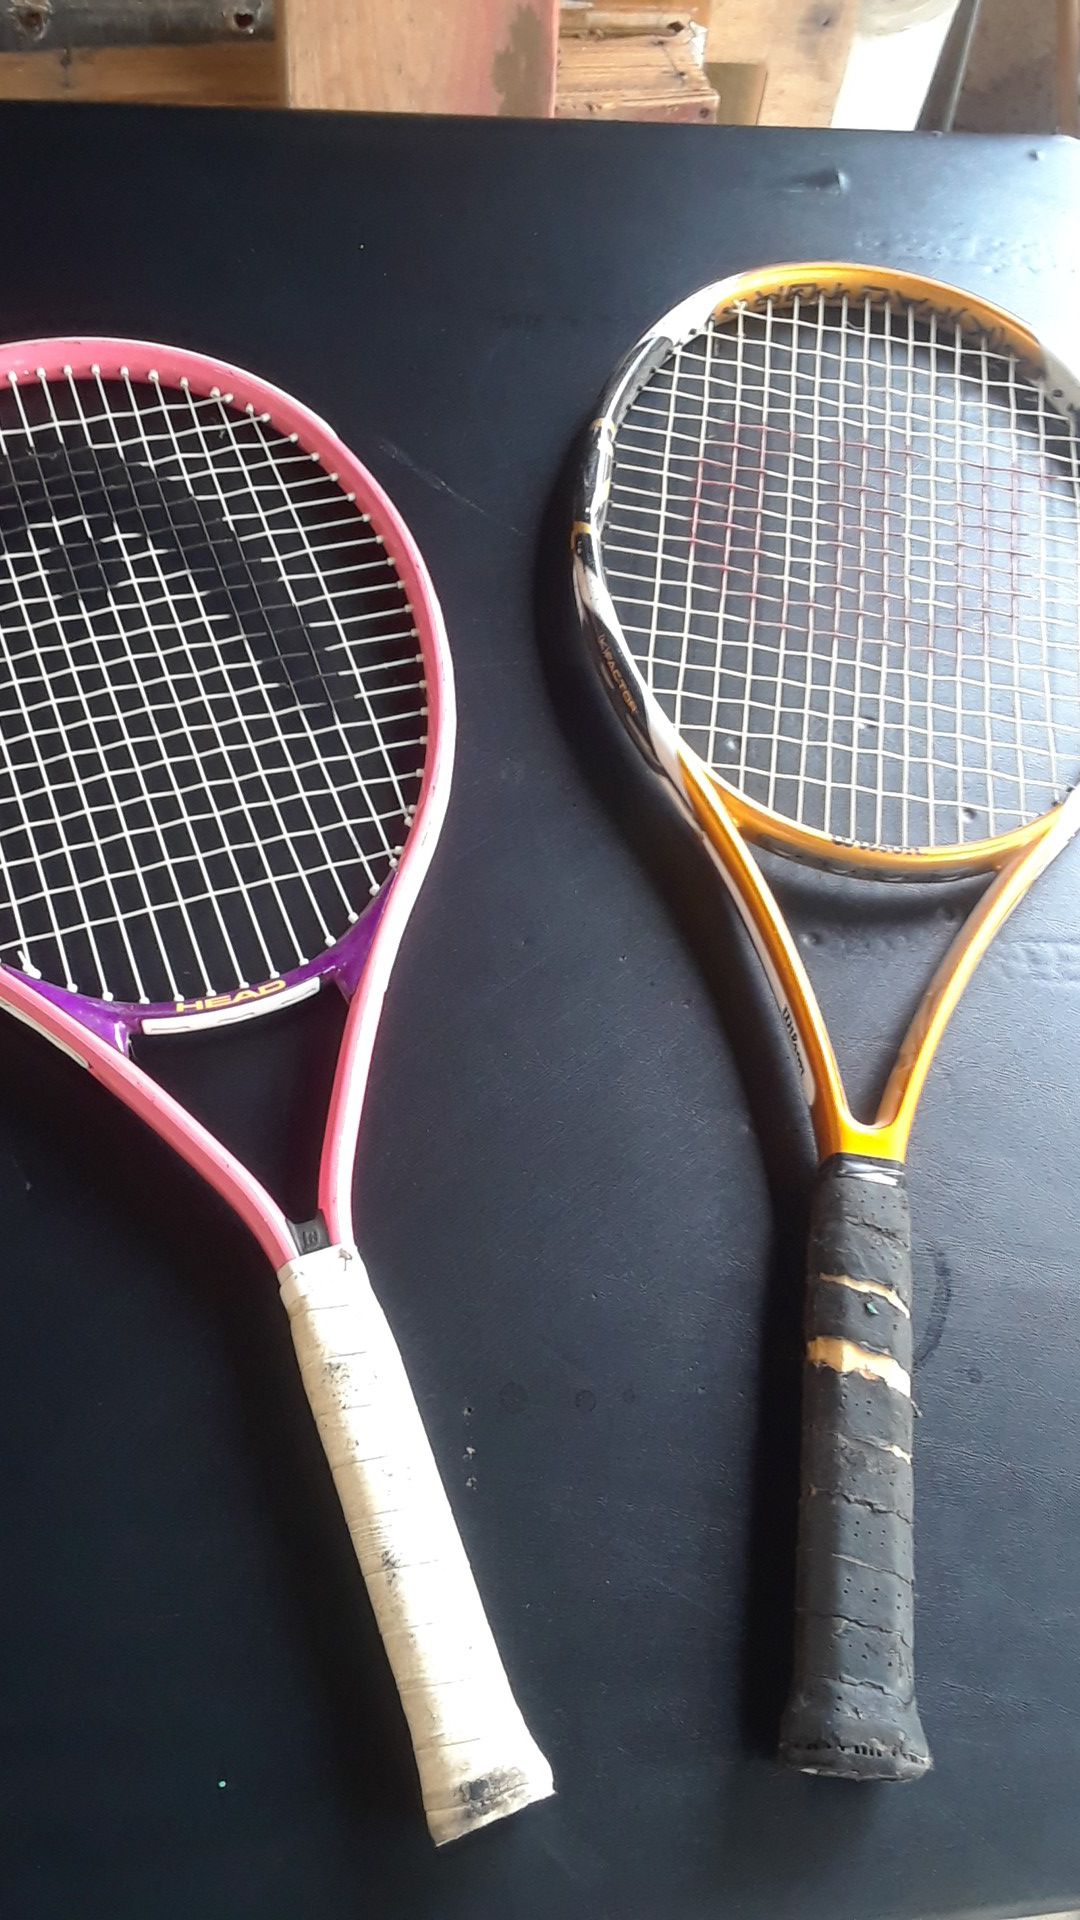 $10 For both tennis rackets